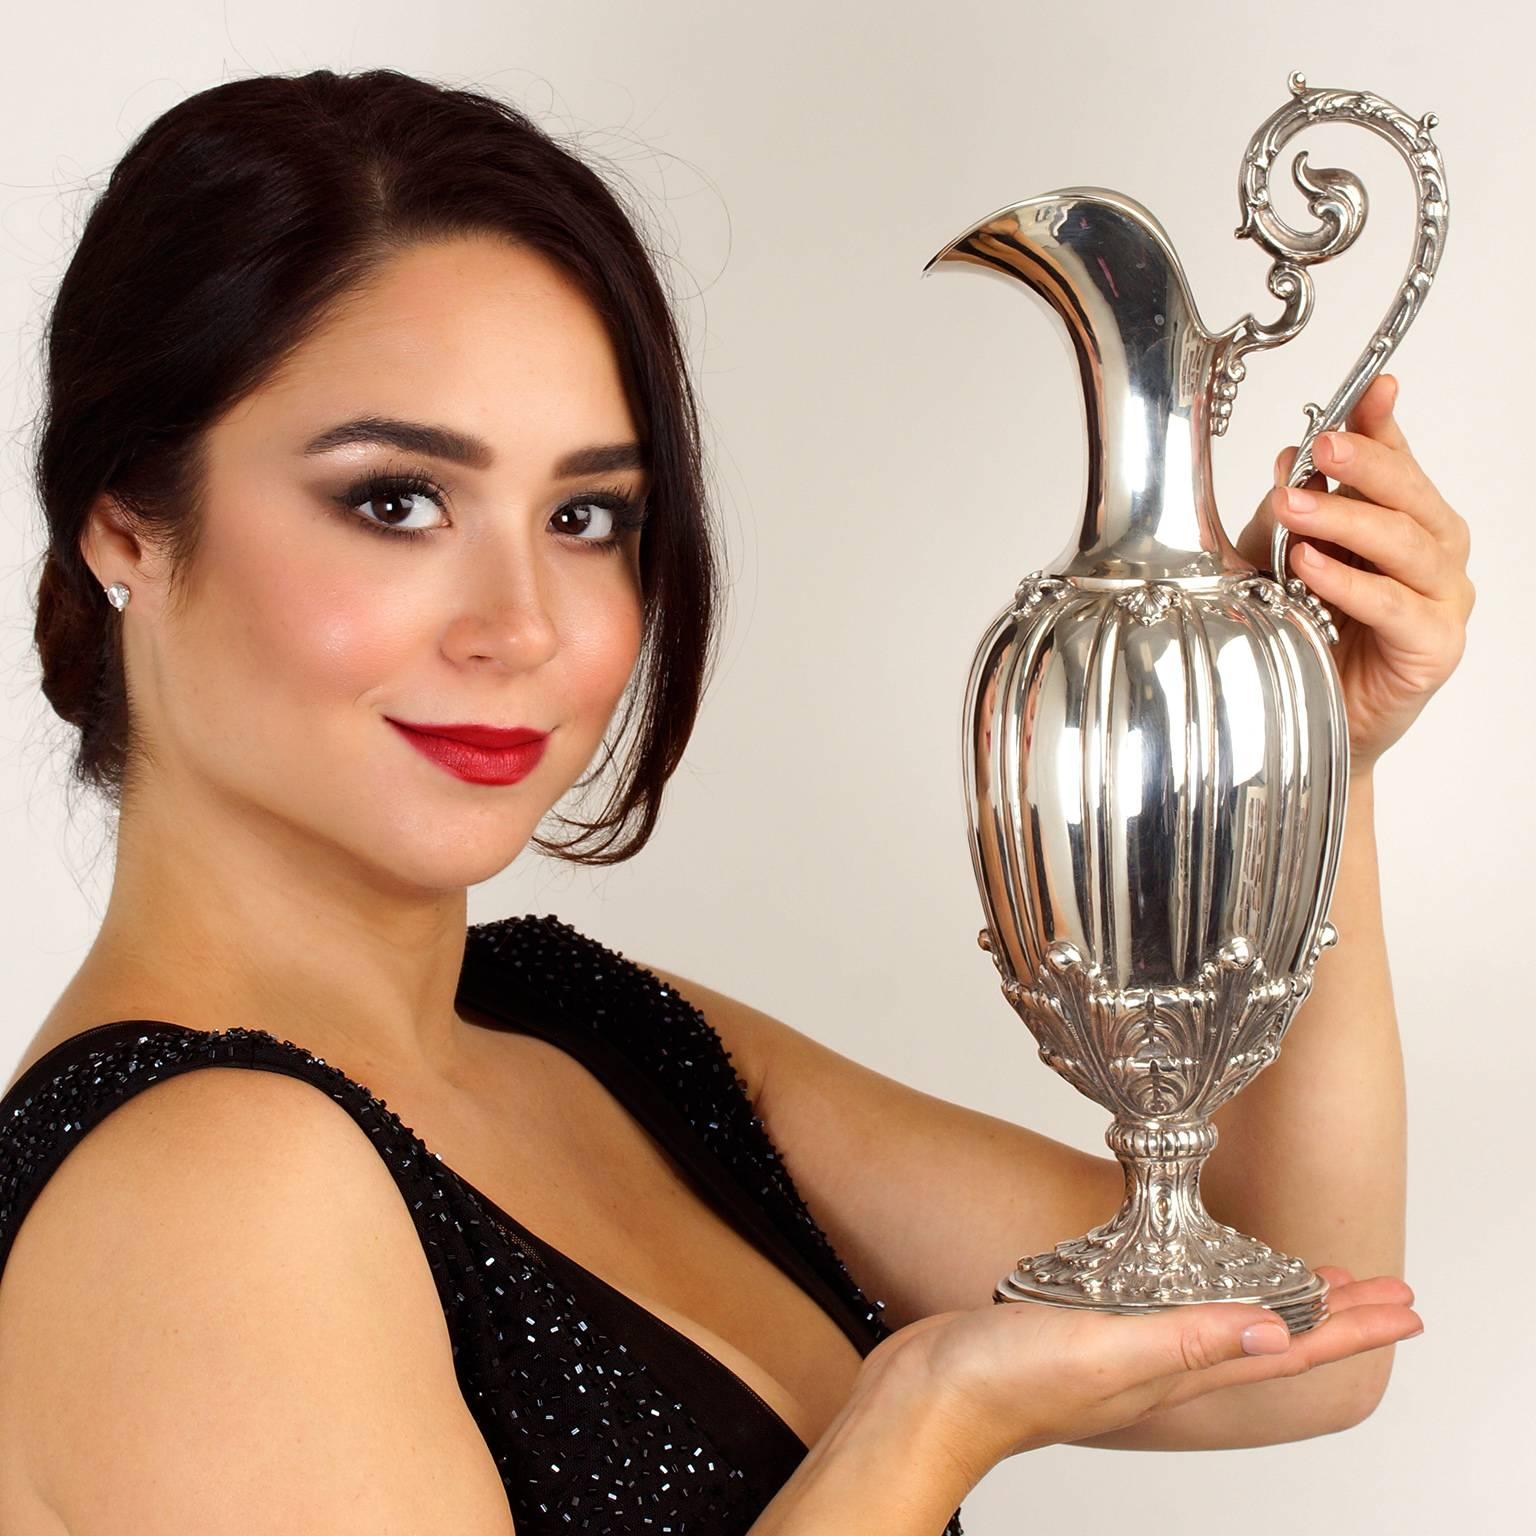 Circa 1930s, .800 Fineness solid silver, by Buccellati, Milan, Italy. This incredible wine ewer in the Baroque style by Mario Buccellati is a rare early example of his work. Made in the 1930s in Buccellati’s original Milan workshop, it is